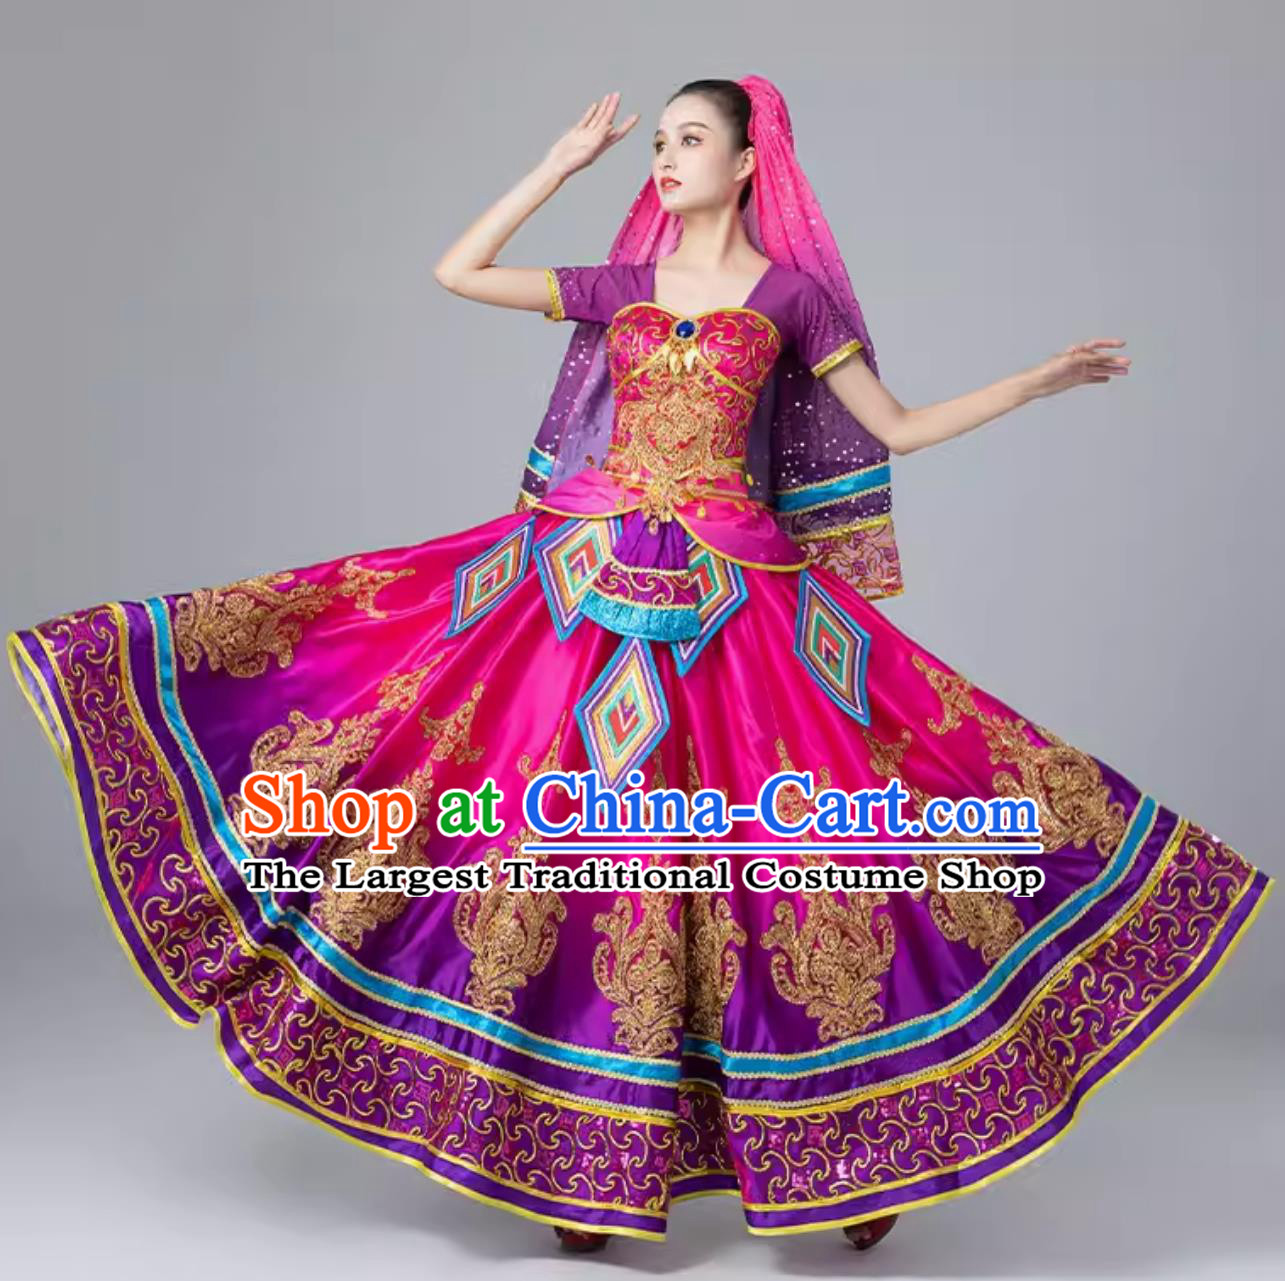 Indian Dance Performance Attire Female Exotic Dance Dress Belly Dance Costume China Xinjiang Dance Uyghur Clothing